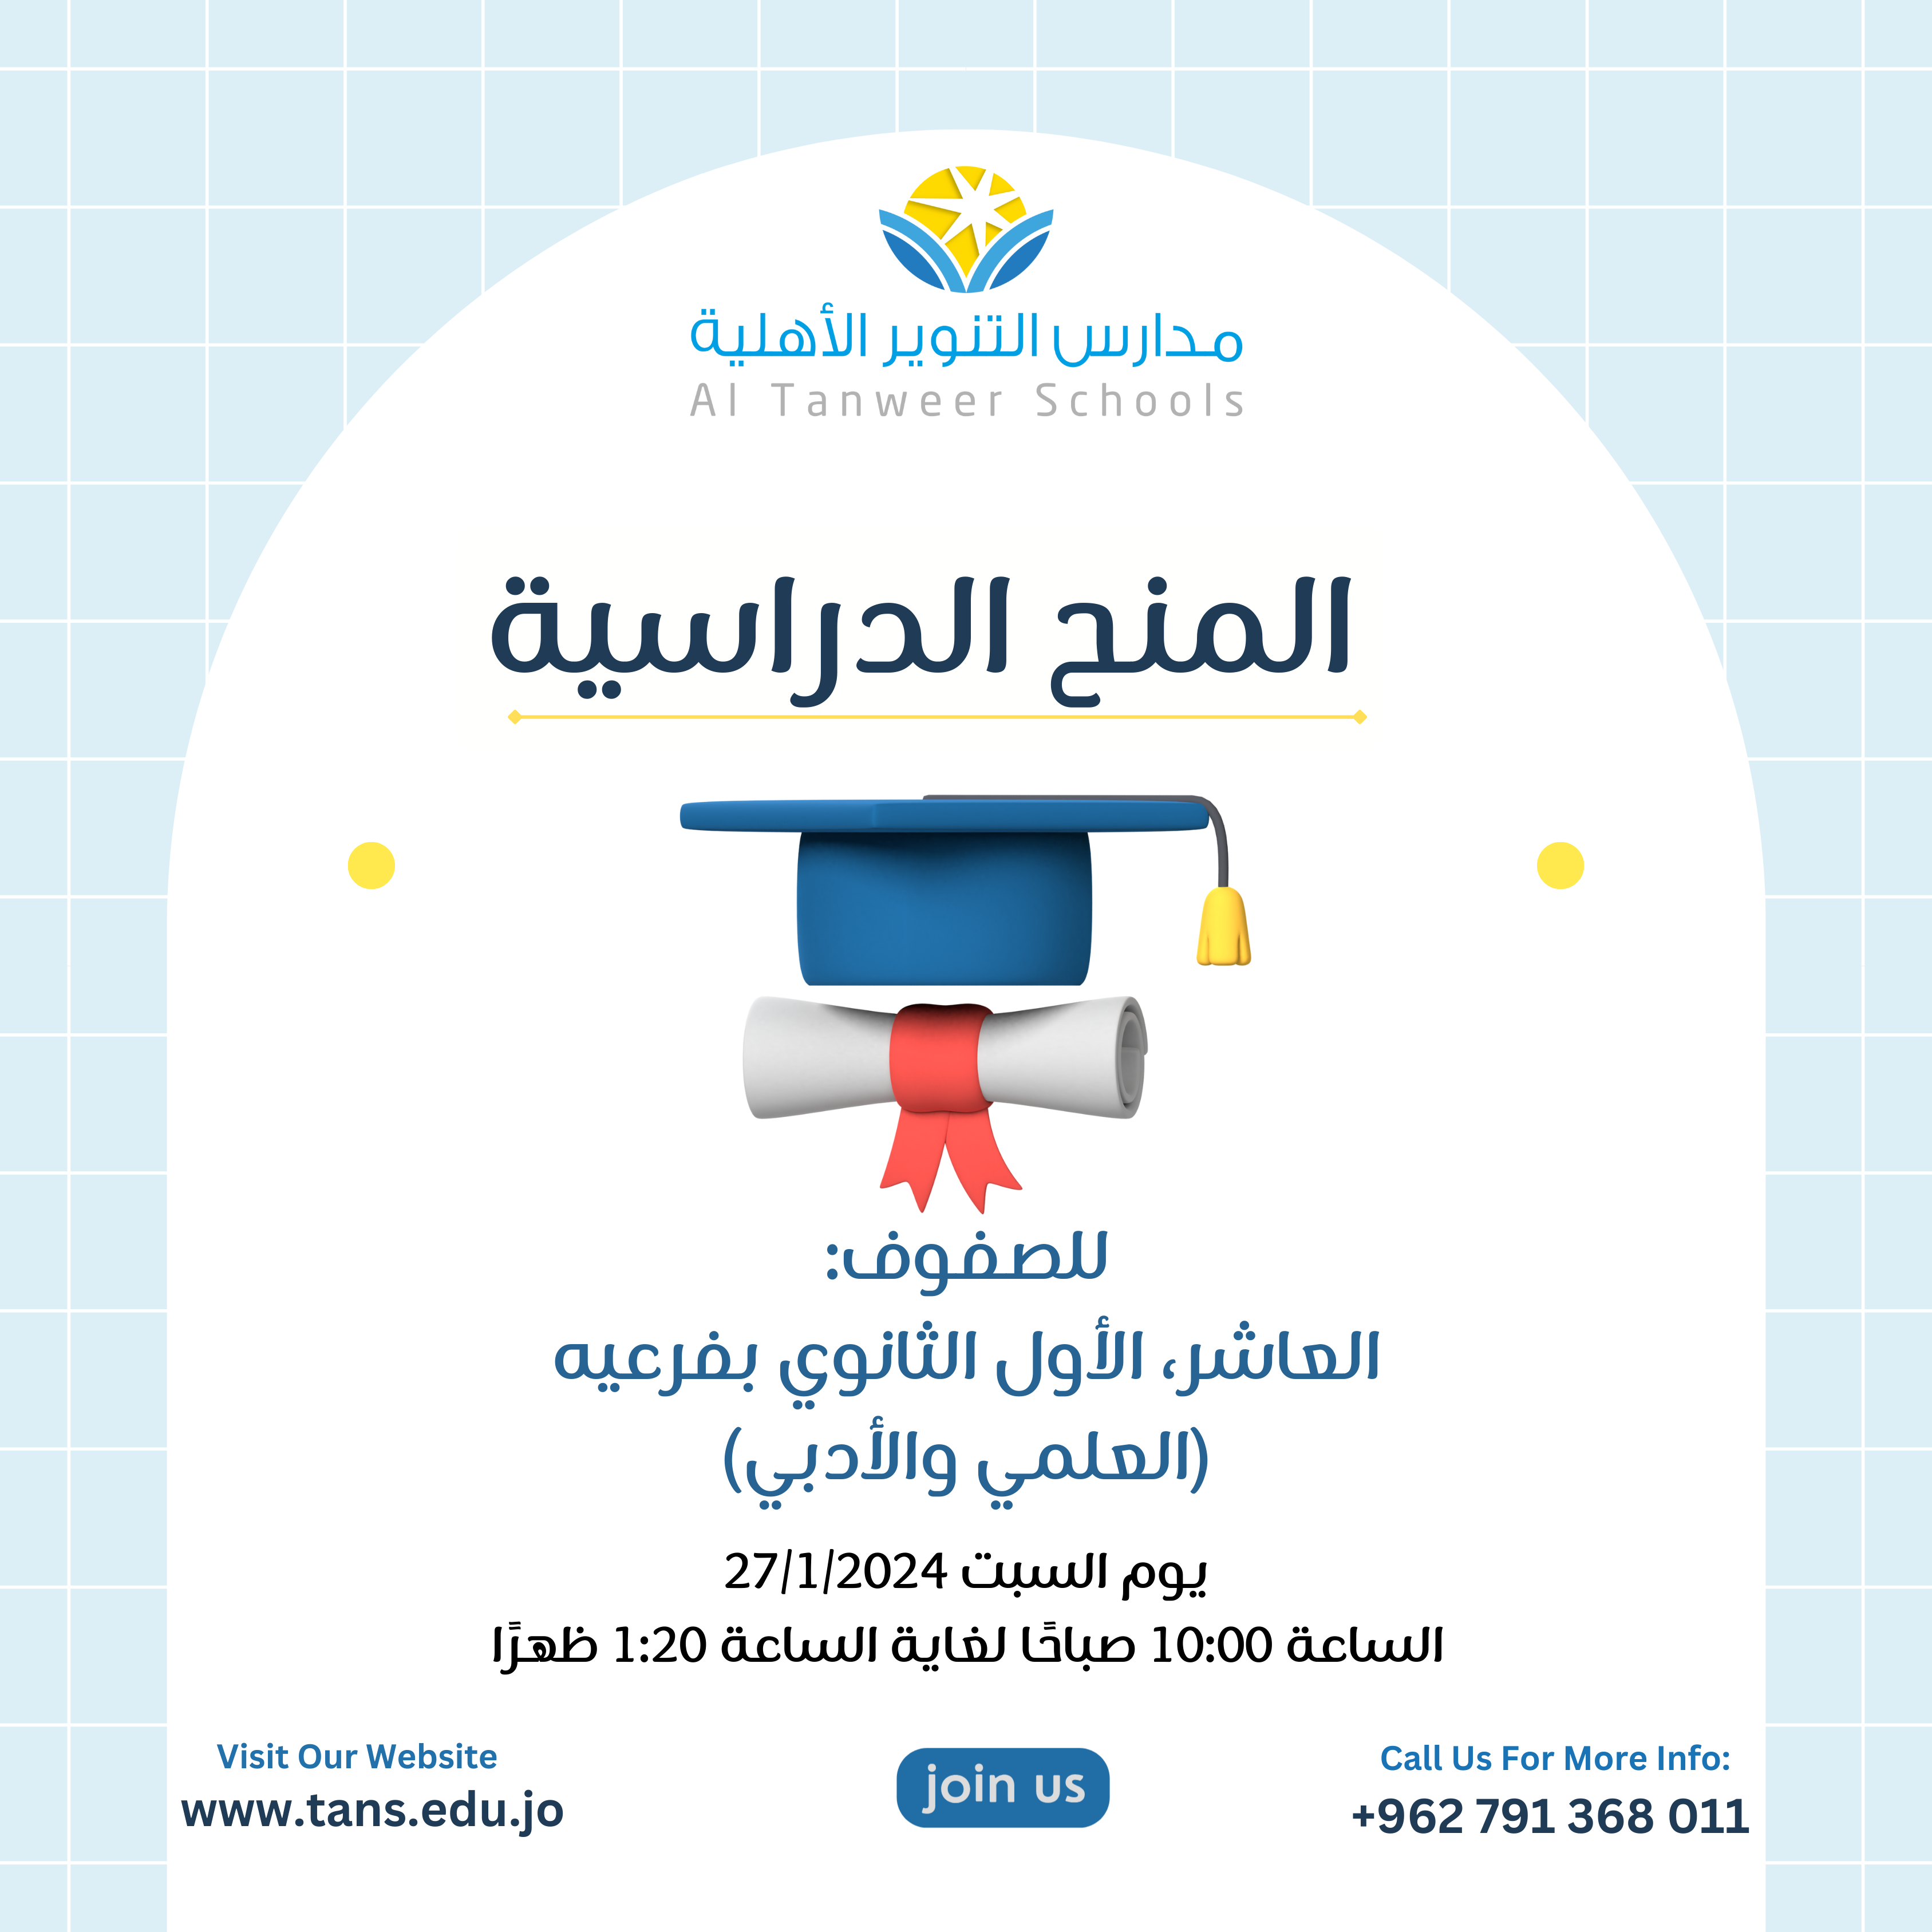 Al-Tanweer Private Schools announces the opening of scholarships for students wishing to take the exam and obtain scholarships offered by the school for the year 2024/2025, for the following grades: Students of the tenth and first year of secondary school (scientific and literary), Note that the test will be in the following subjects: Arabic, English, and Mathematics. NB: - For first secondary school students in the literary stream, the Arabic language test will be in the Arabic subject, specialization, instead of the Arabic language skills test. The test will be on Saturday 1/27/2024 at 10:00 am. We ask that you arrive half an hour before the start of the test. 🔹 This announcement concerns students from outside Al-Tanweer Private Schools. As for our dear school students, the school will contact them. To apply for the scholarship, please fill out the attached link: https://forms.gle/YeGX6qhYZRnnkaNe8